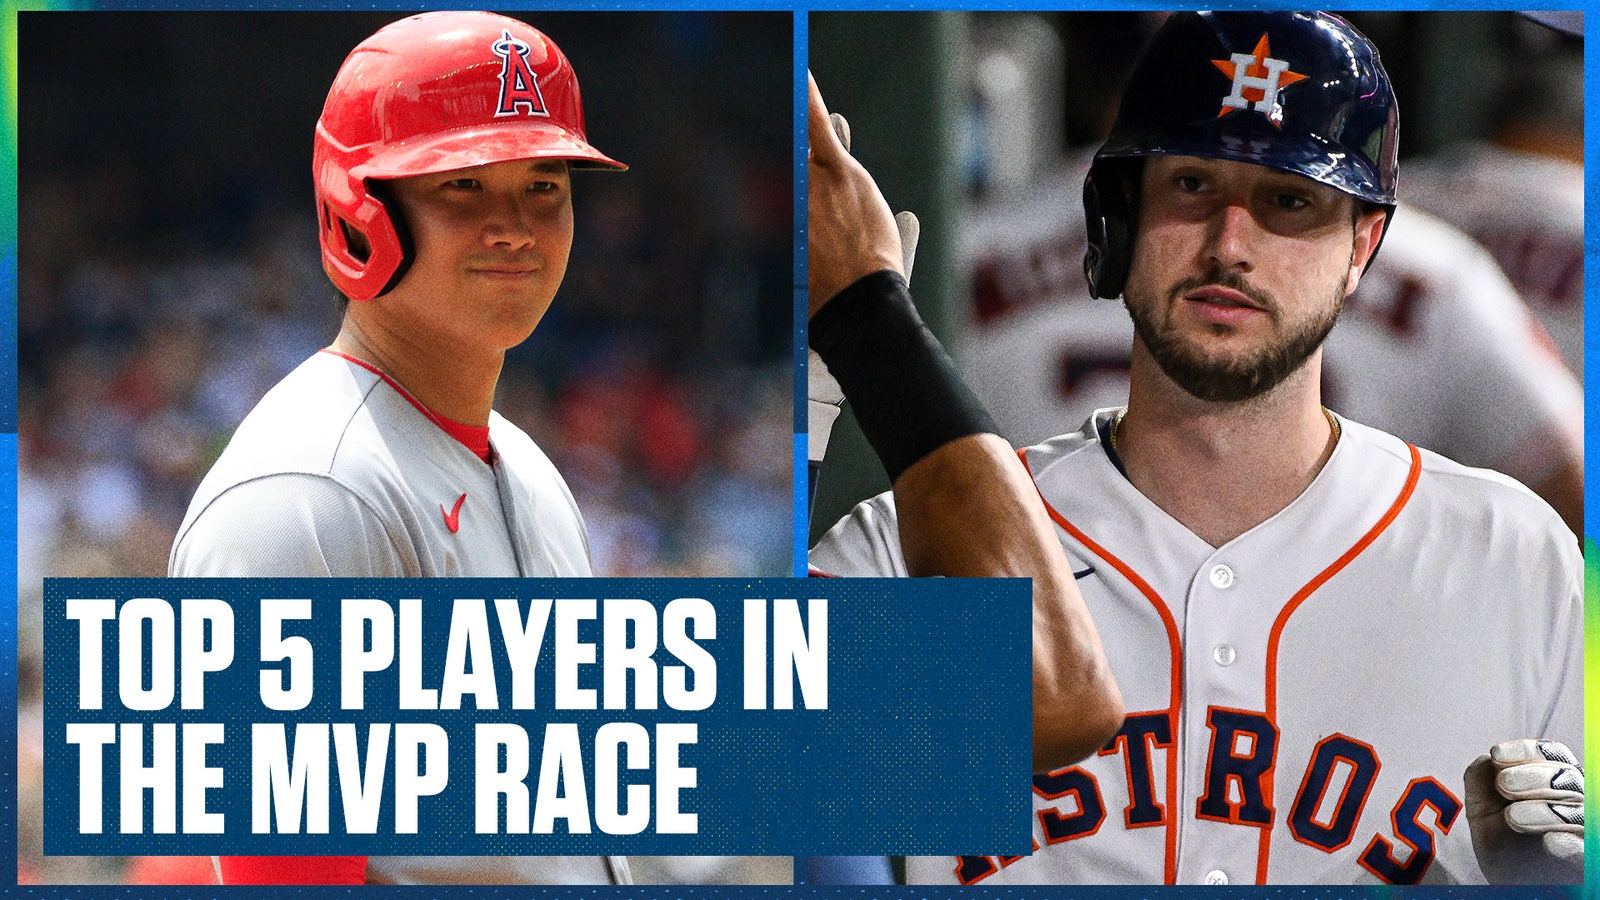 Shohei Ohtani leads the MVP Race, but Astros' Kyle Tucker joins the Top-5